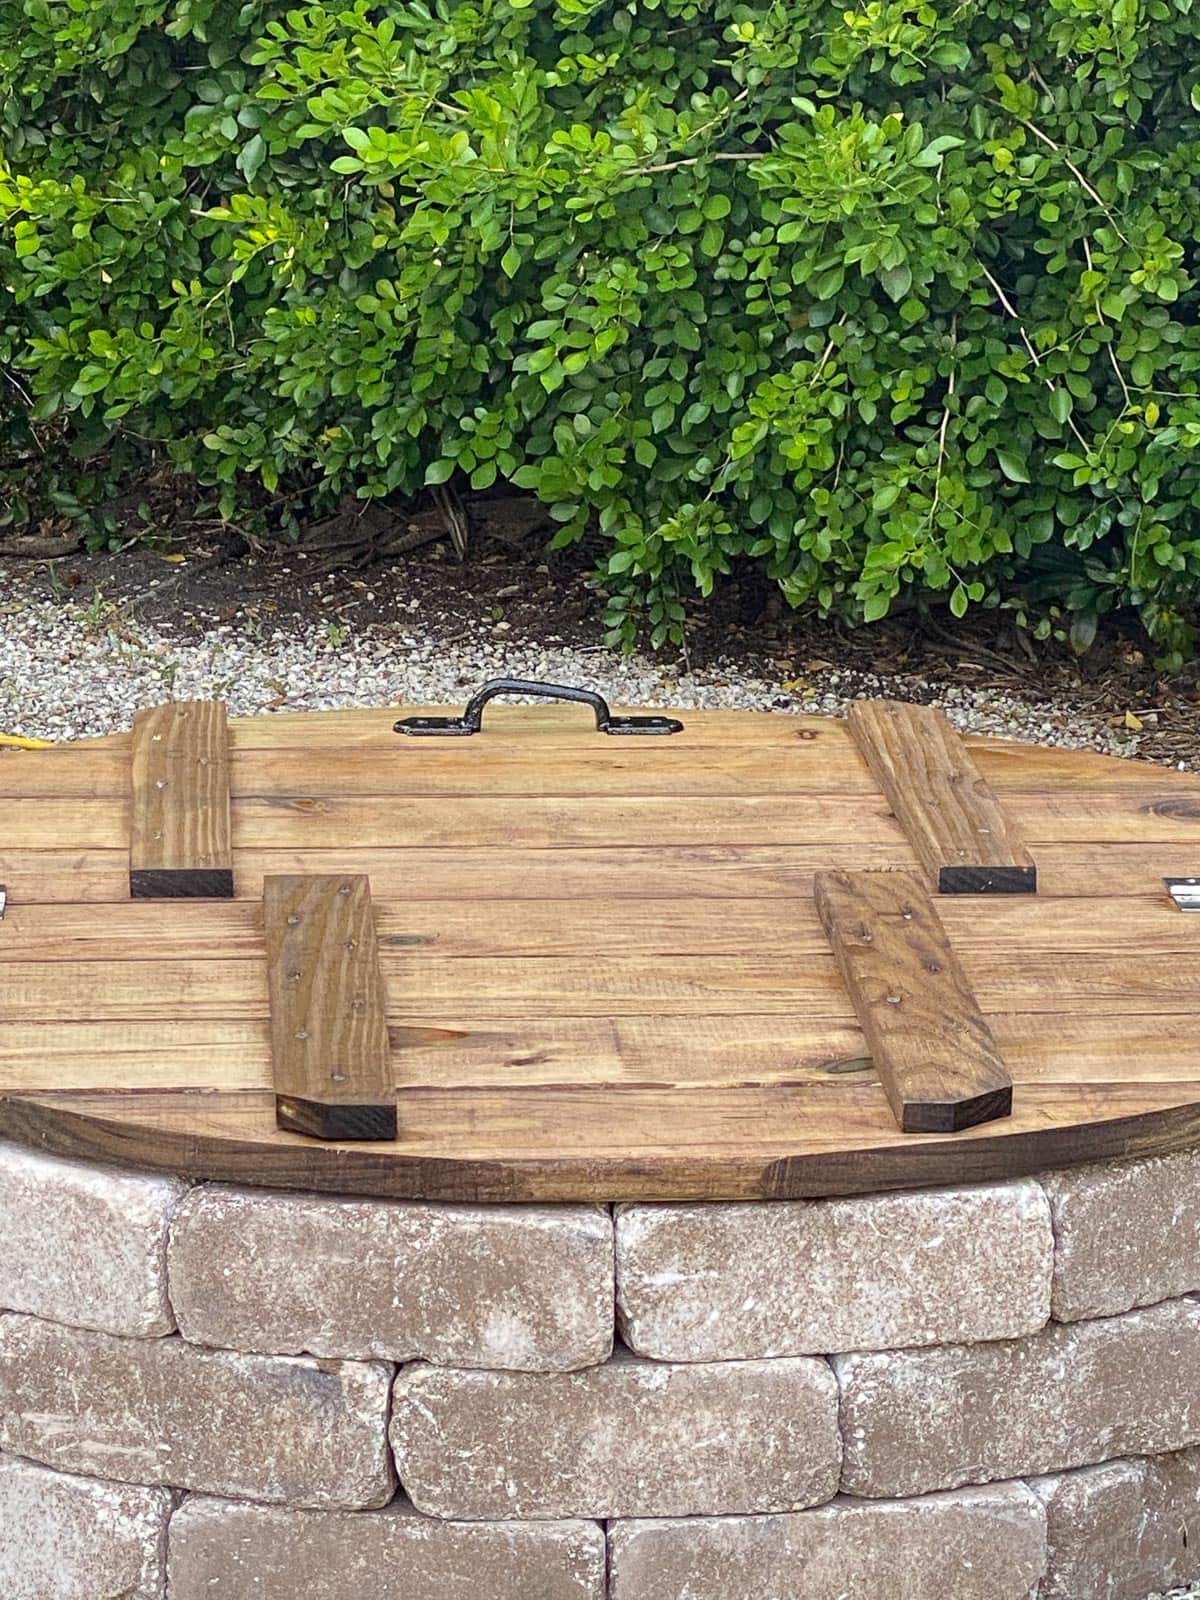 garden fire pit with a lid